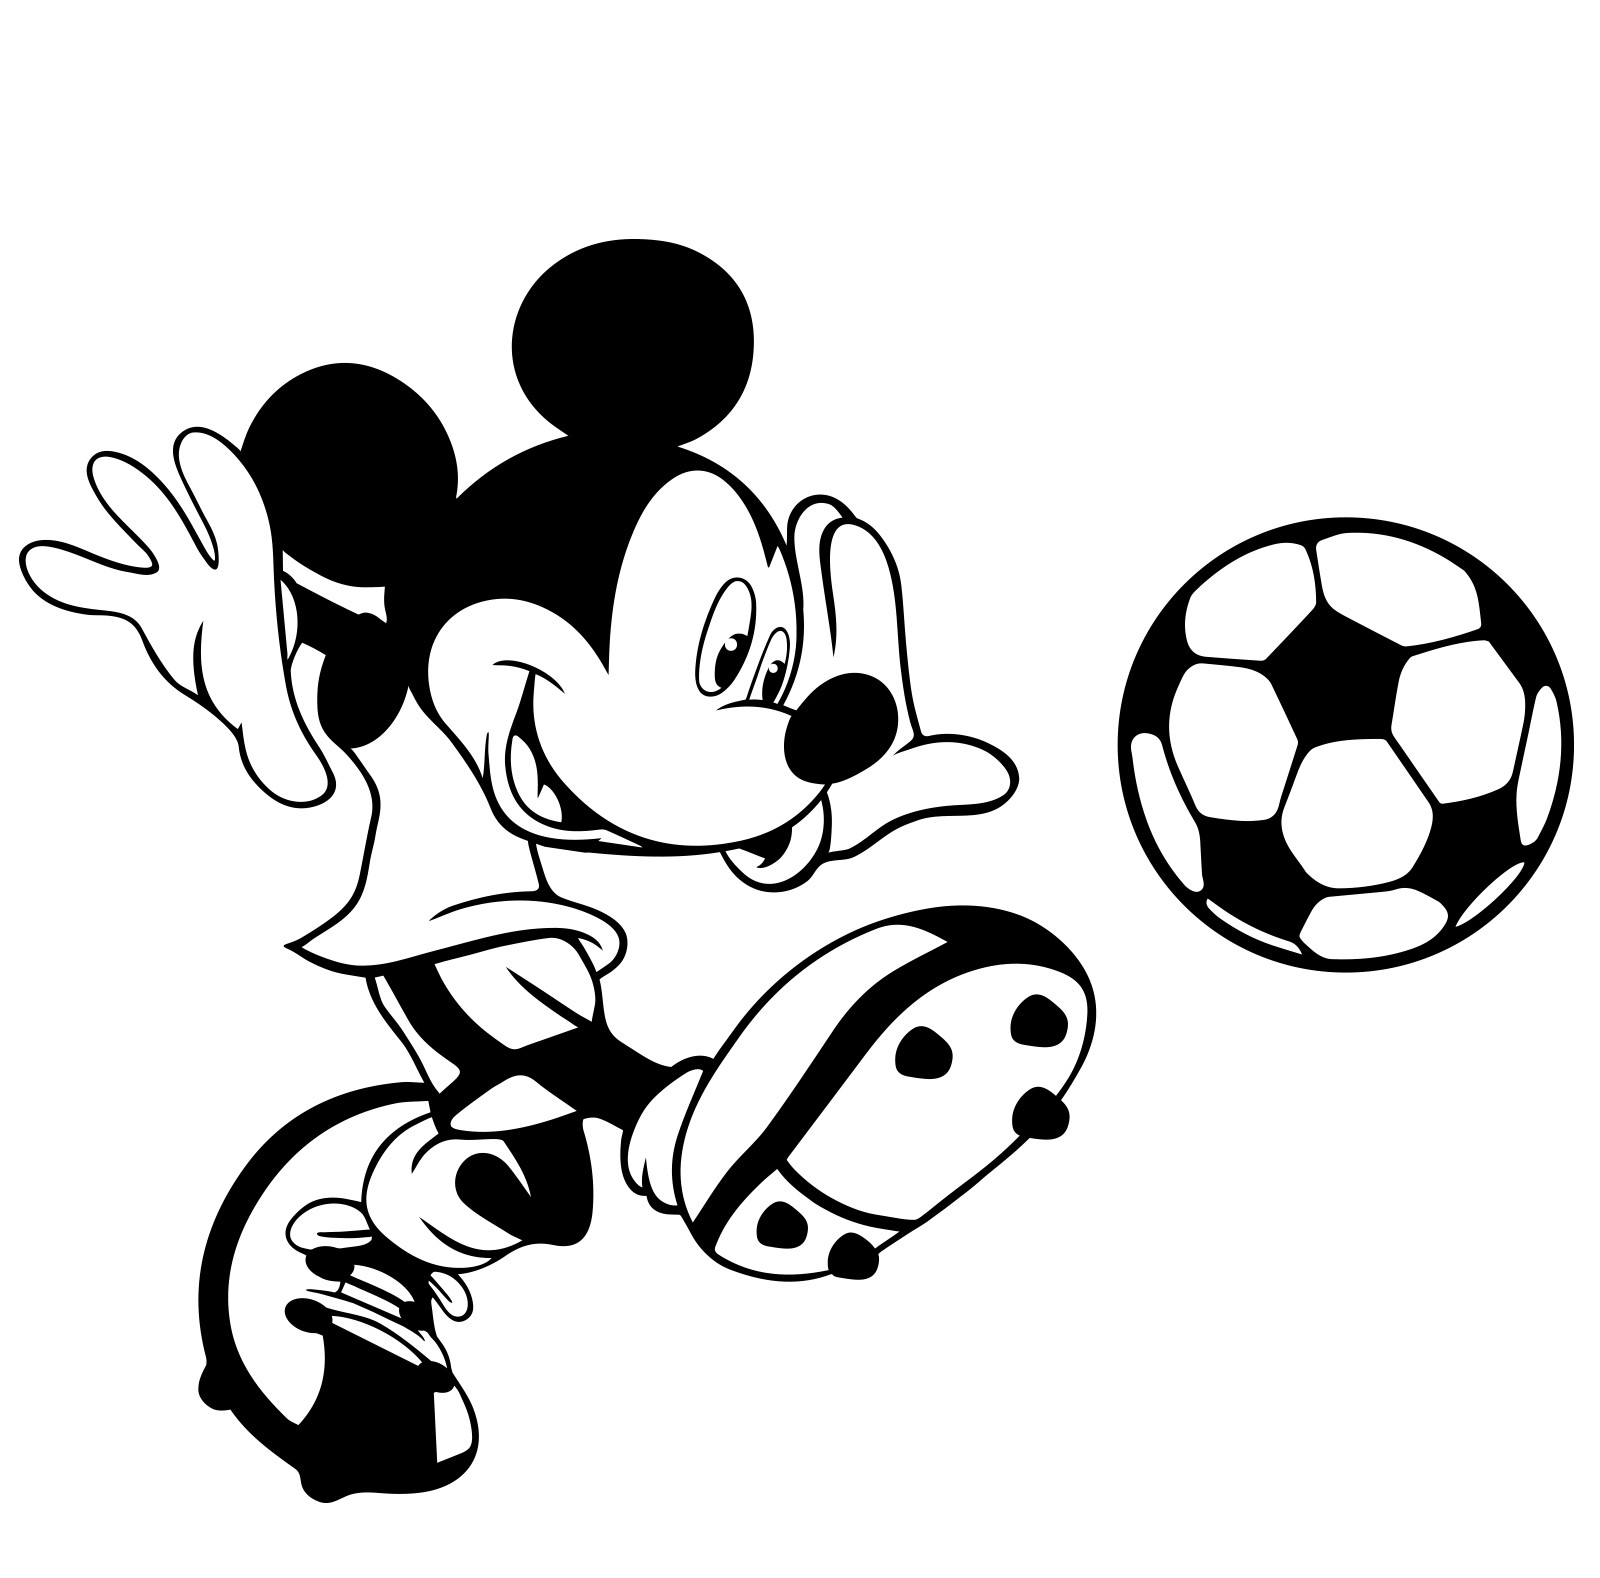 full-hd-black-and-white-mickey-mouse-clip-art-library